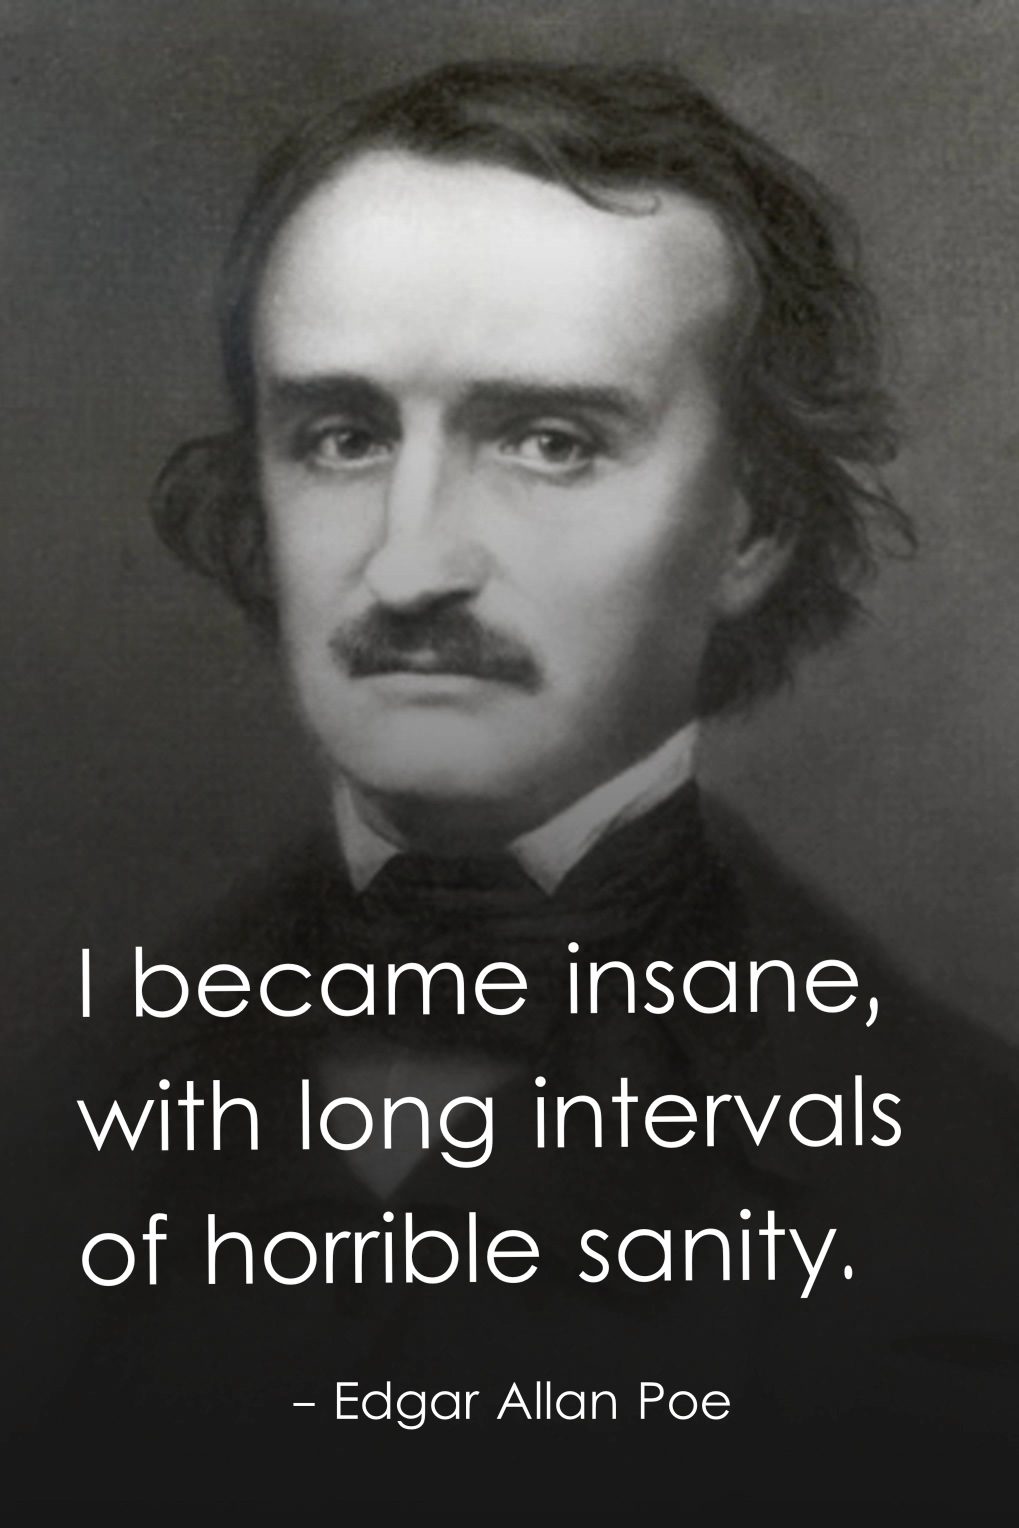 I became insane, with long intervals of horrible sanity.